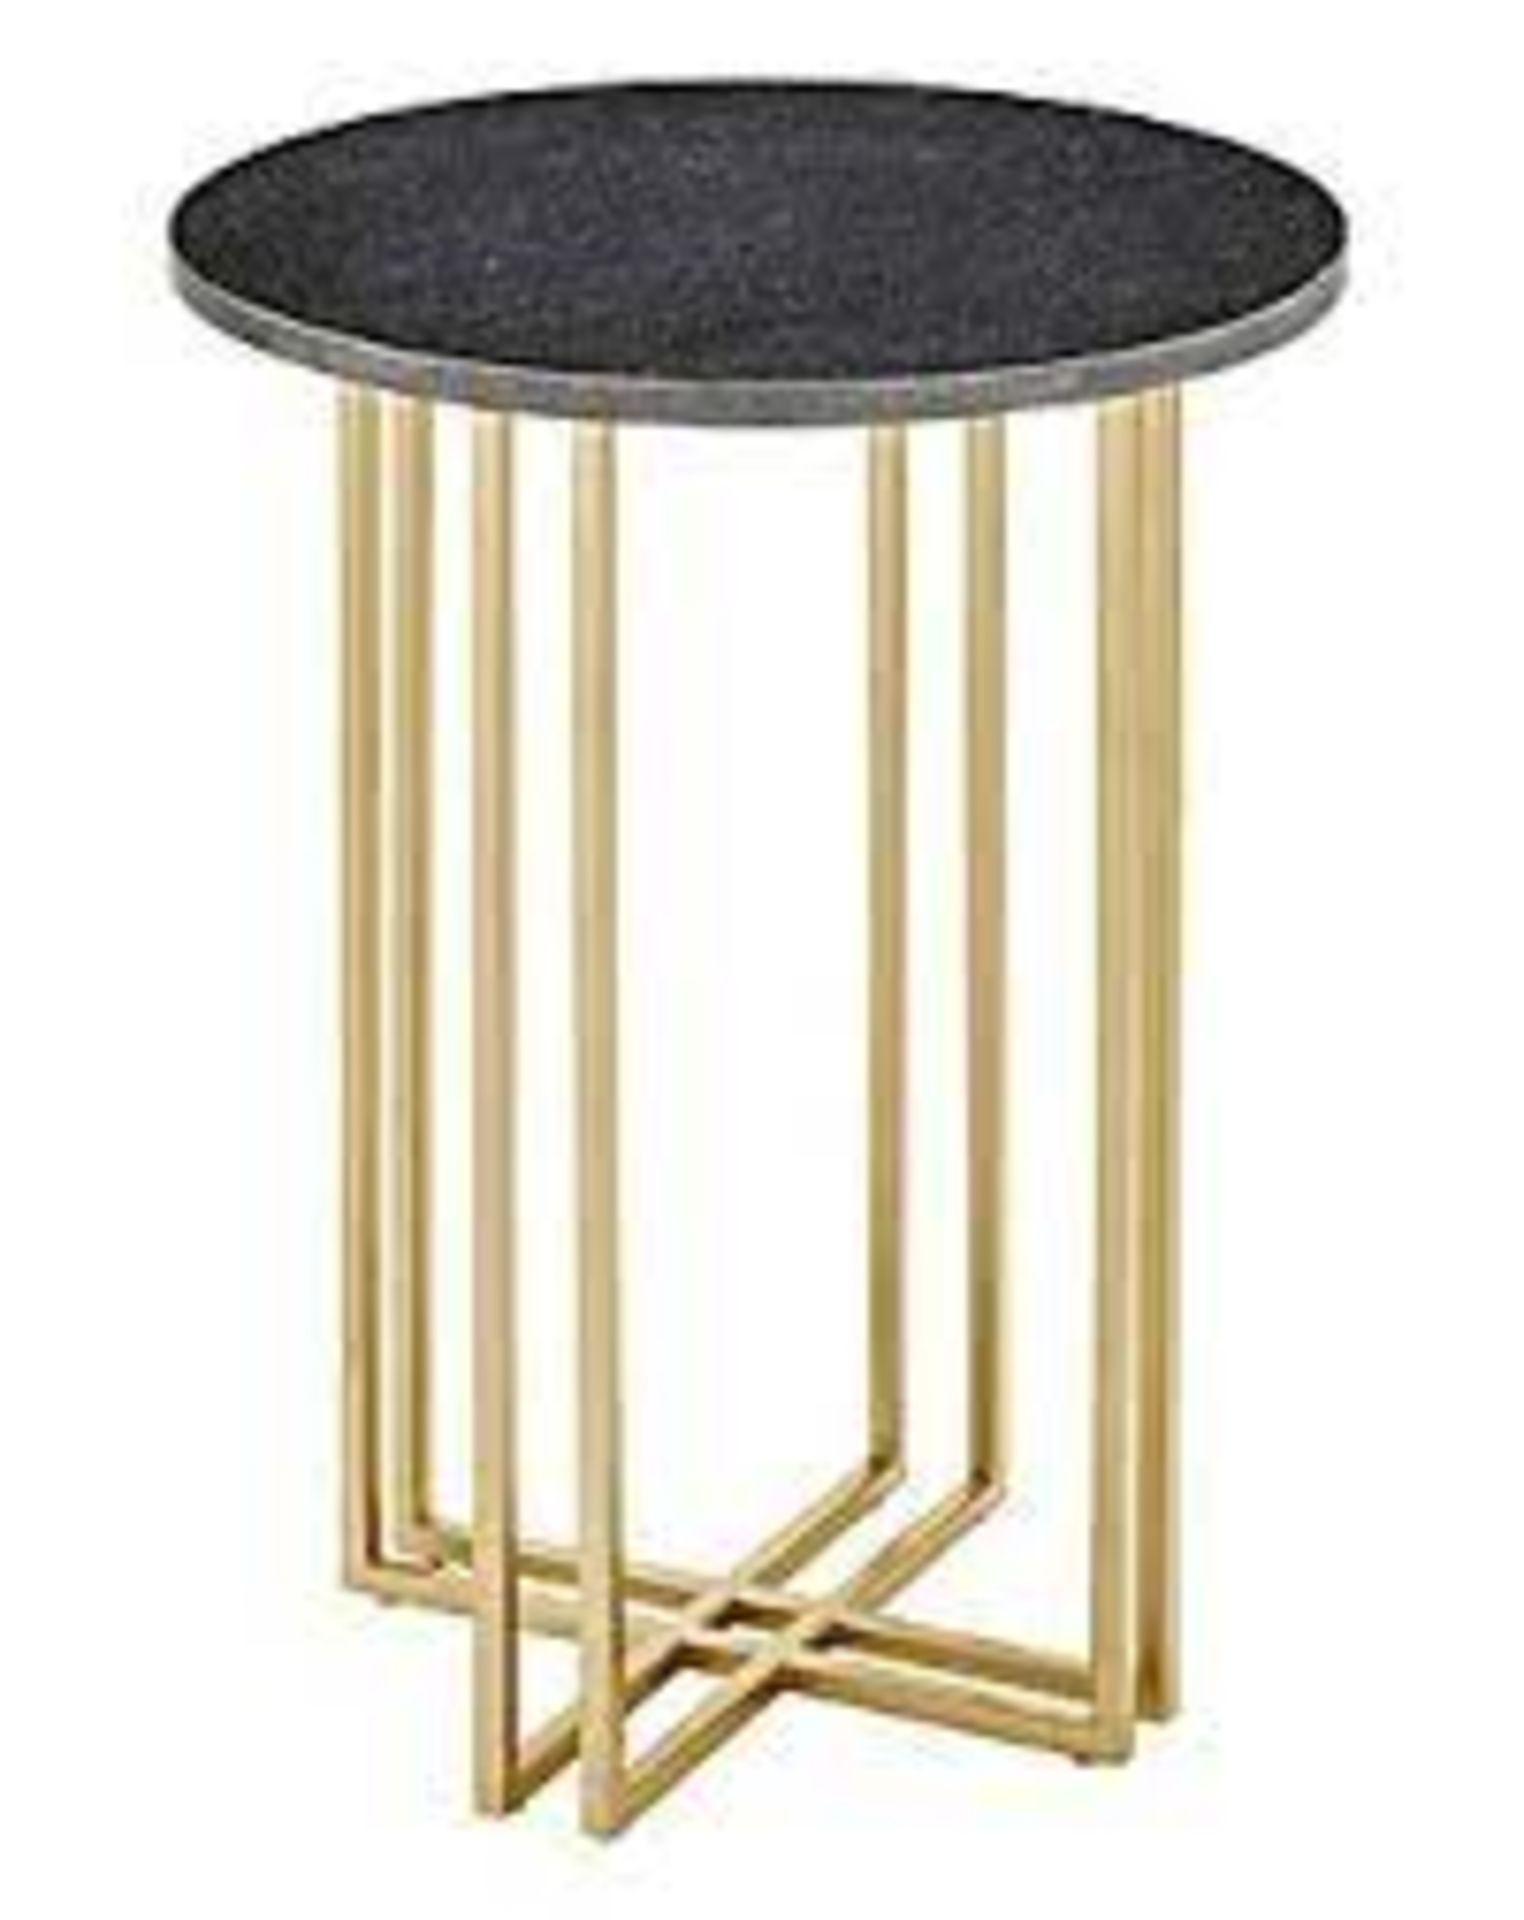 Viola Marble Side Table, with gold legs. RRP £100.00.